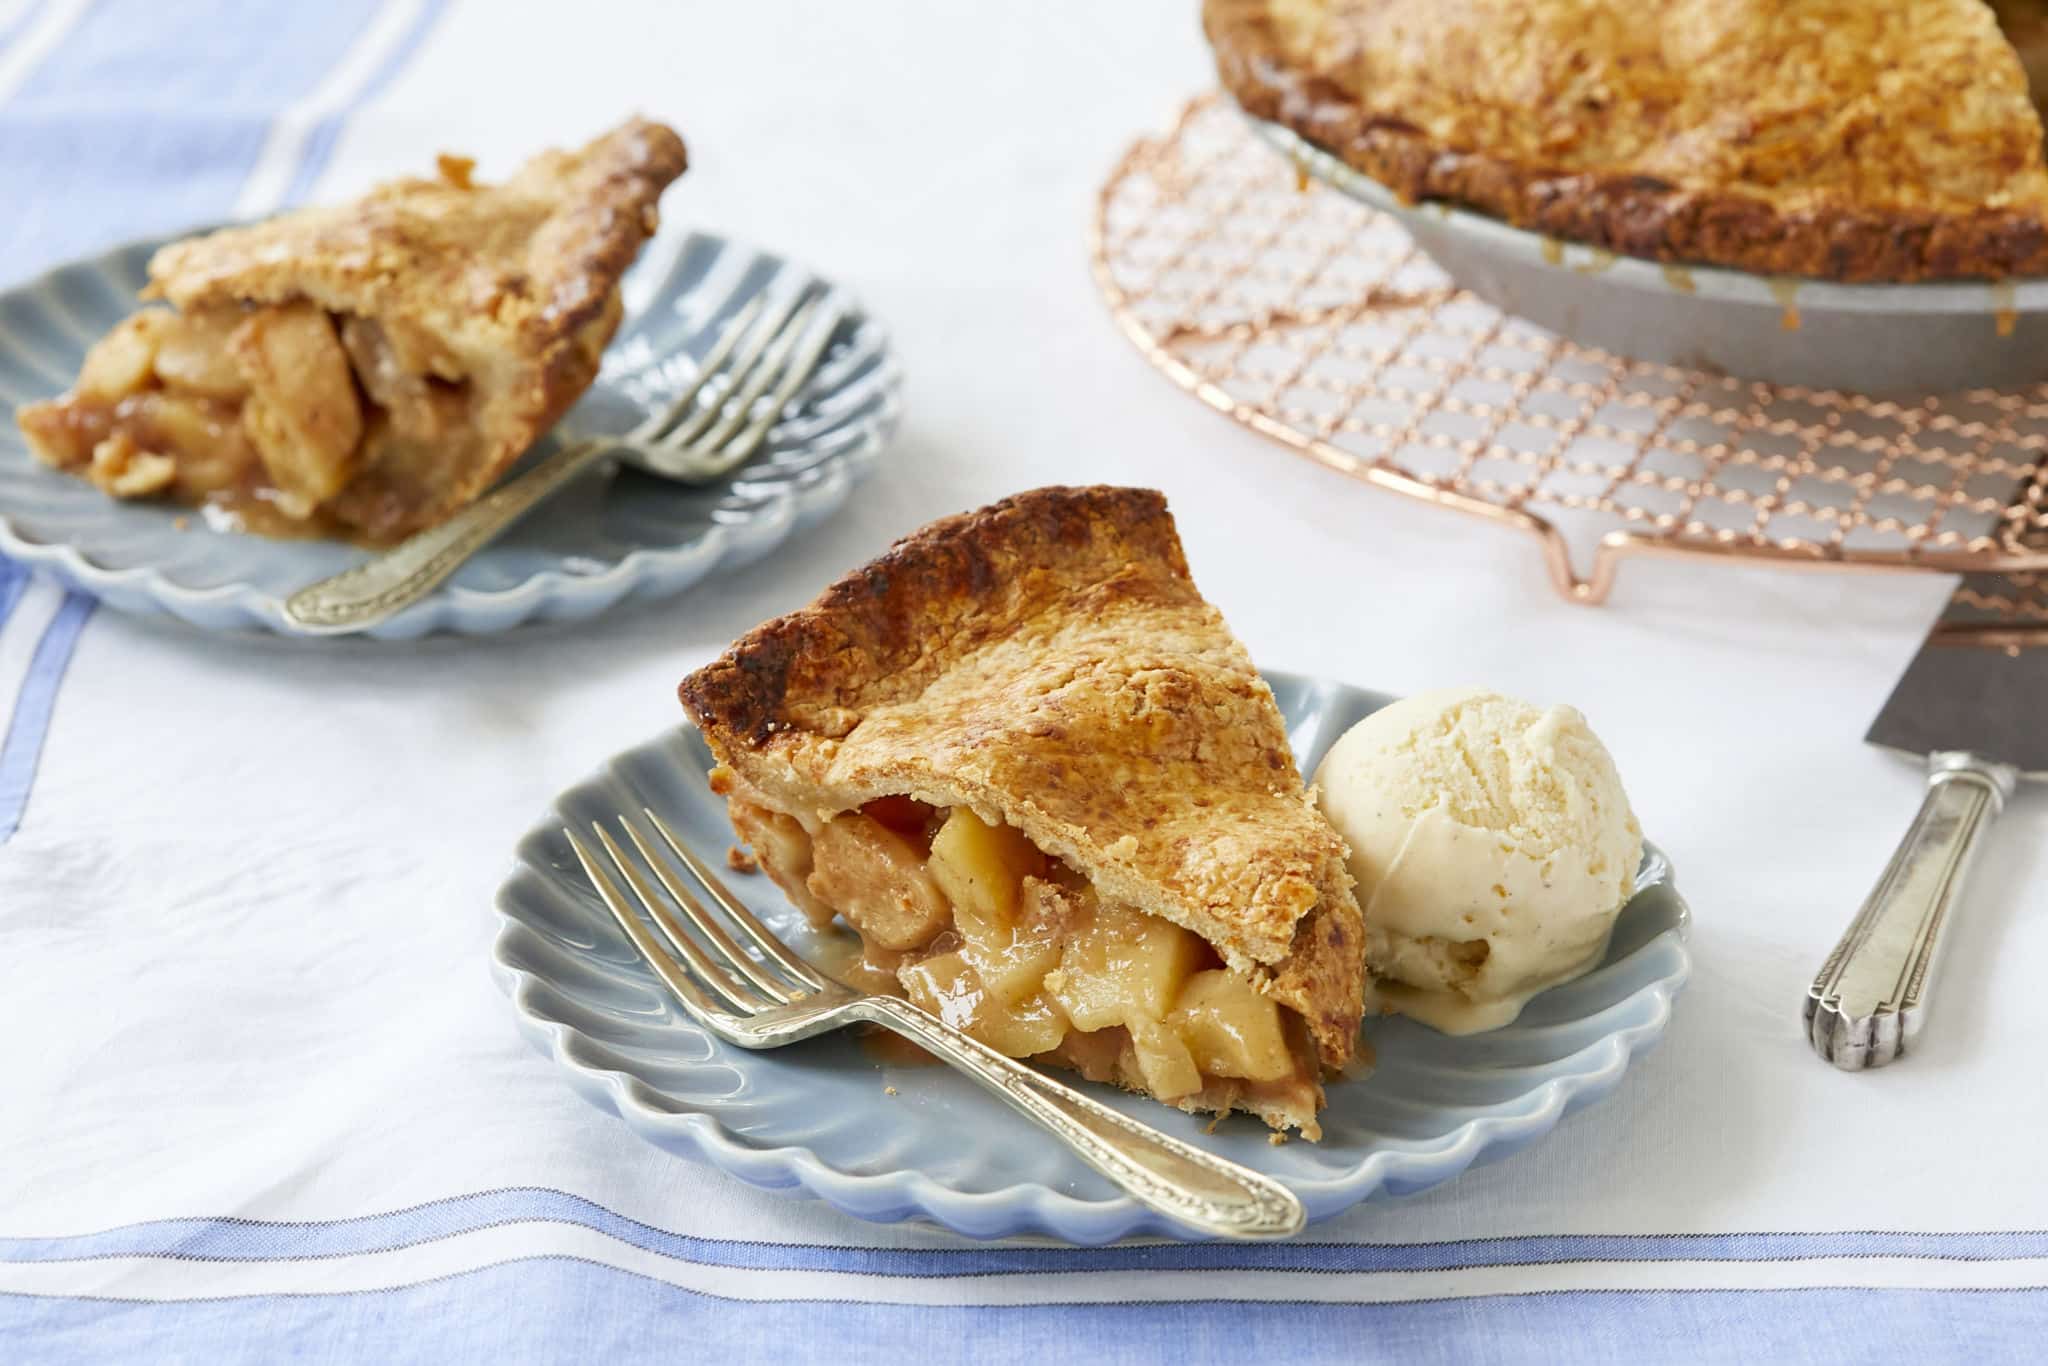 A slice of Apple Cheddar Pie is served on a dish with a scoop of vanilla ice cream. The apple pie filling is topped with a cheddar cheese crust.